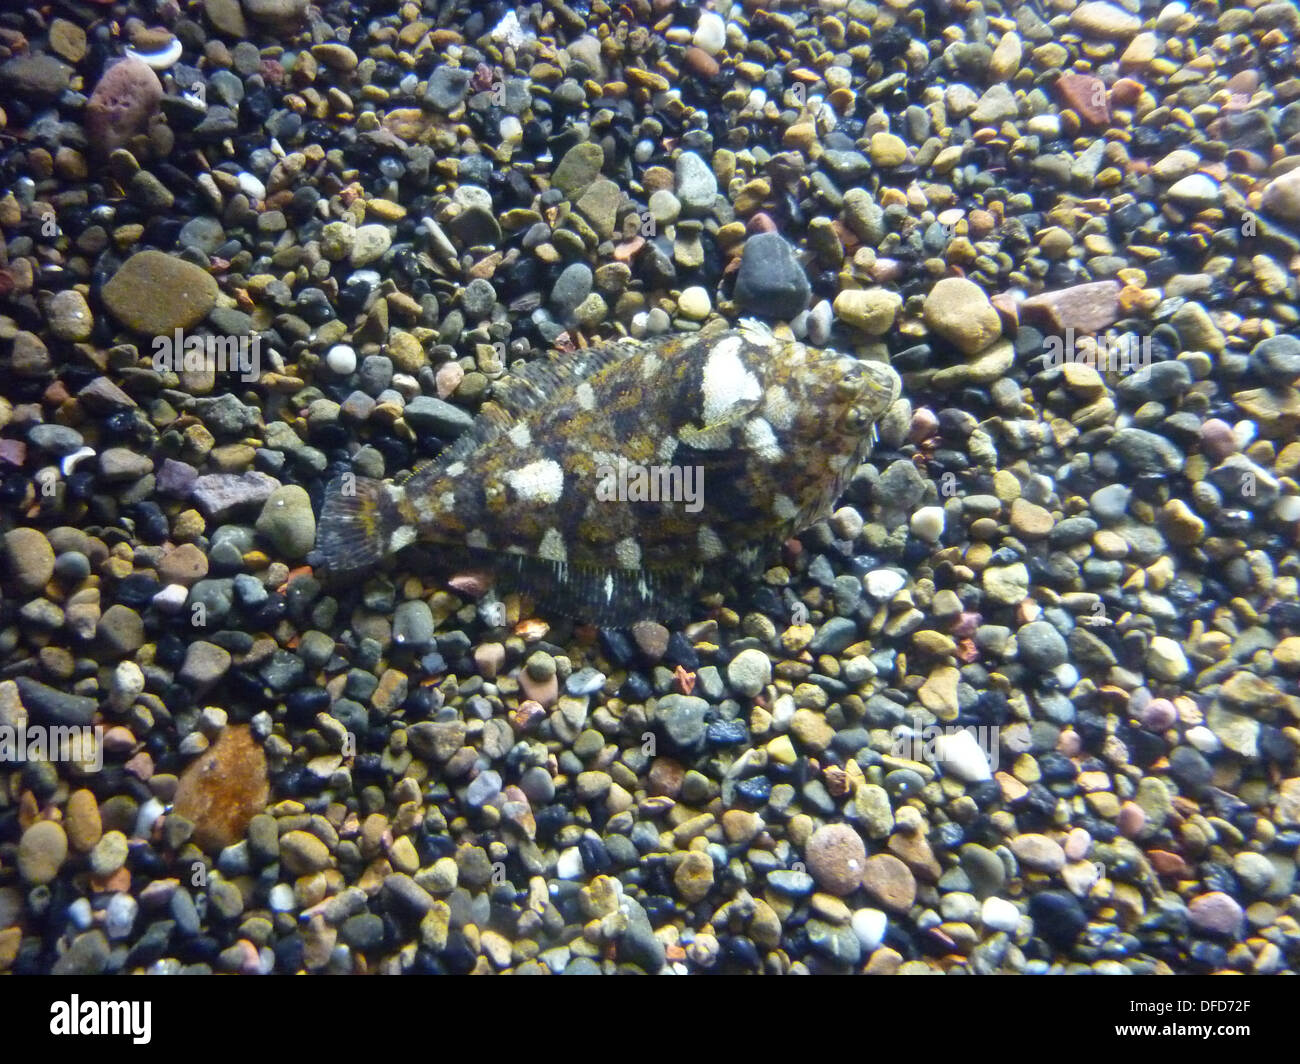 A flat fish disguises itself using camouflage to hide on the ocean floor Stock Photo